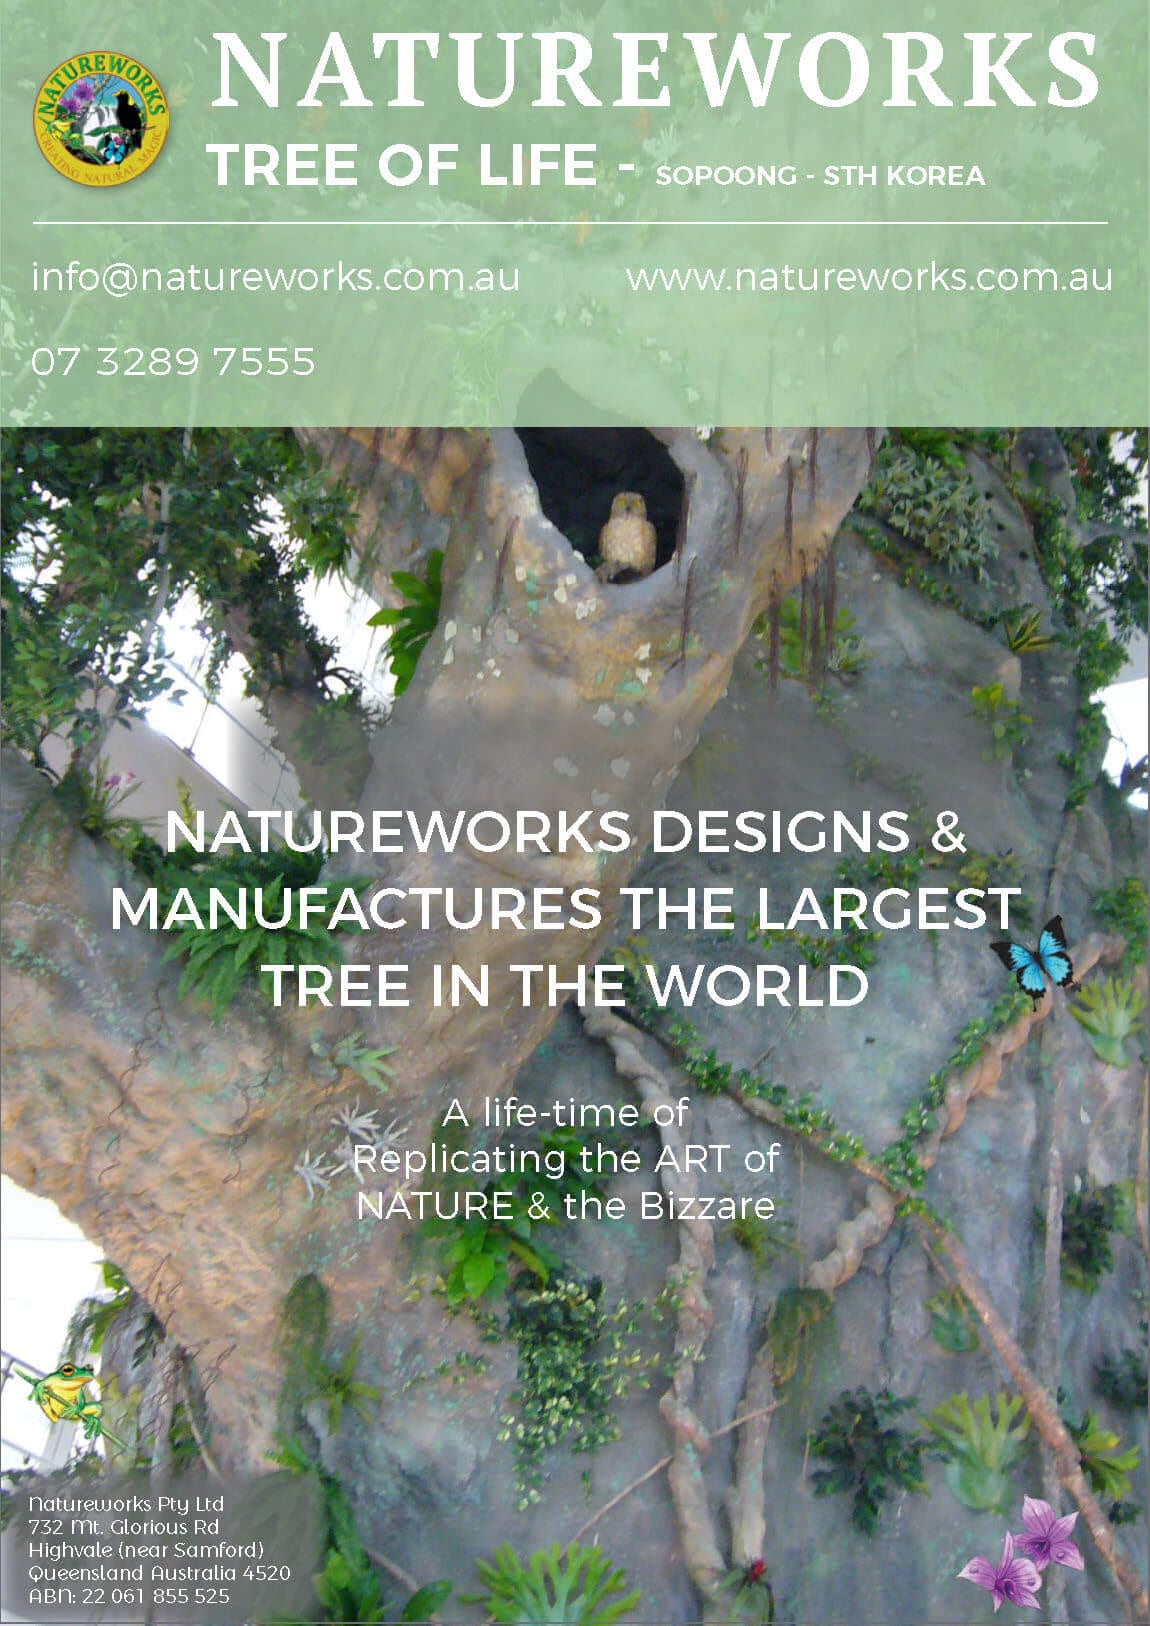 Natureworks designs & engineers the largest tree in the world.